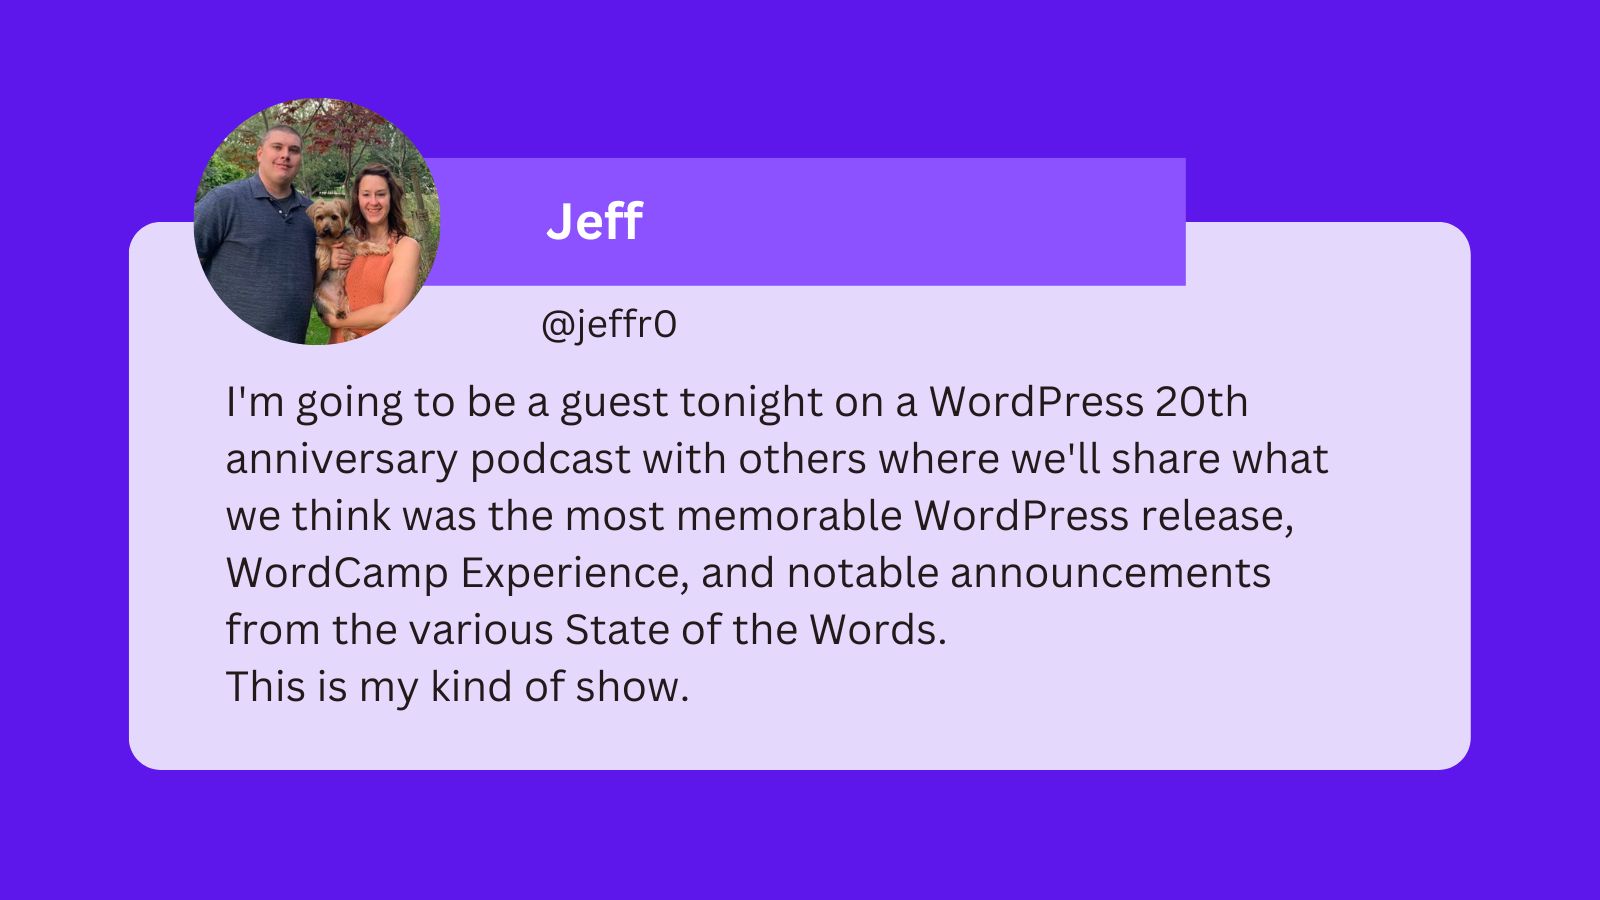 A tweet from Jeff that reads: I'm going to be a guest tonight on a WordPress 20th anniversary podcast with others where we'll share what we think was the most memorable WordPress release, WordCamp Experience, and notable announcements from the various State of the Words. This is my kind of show.